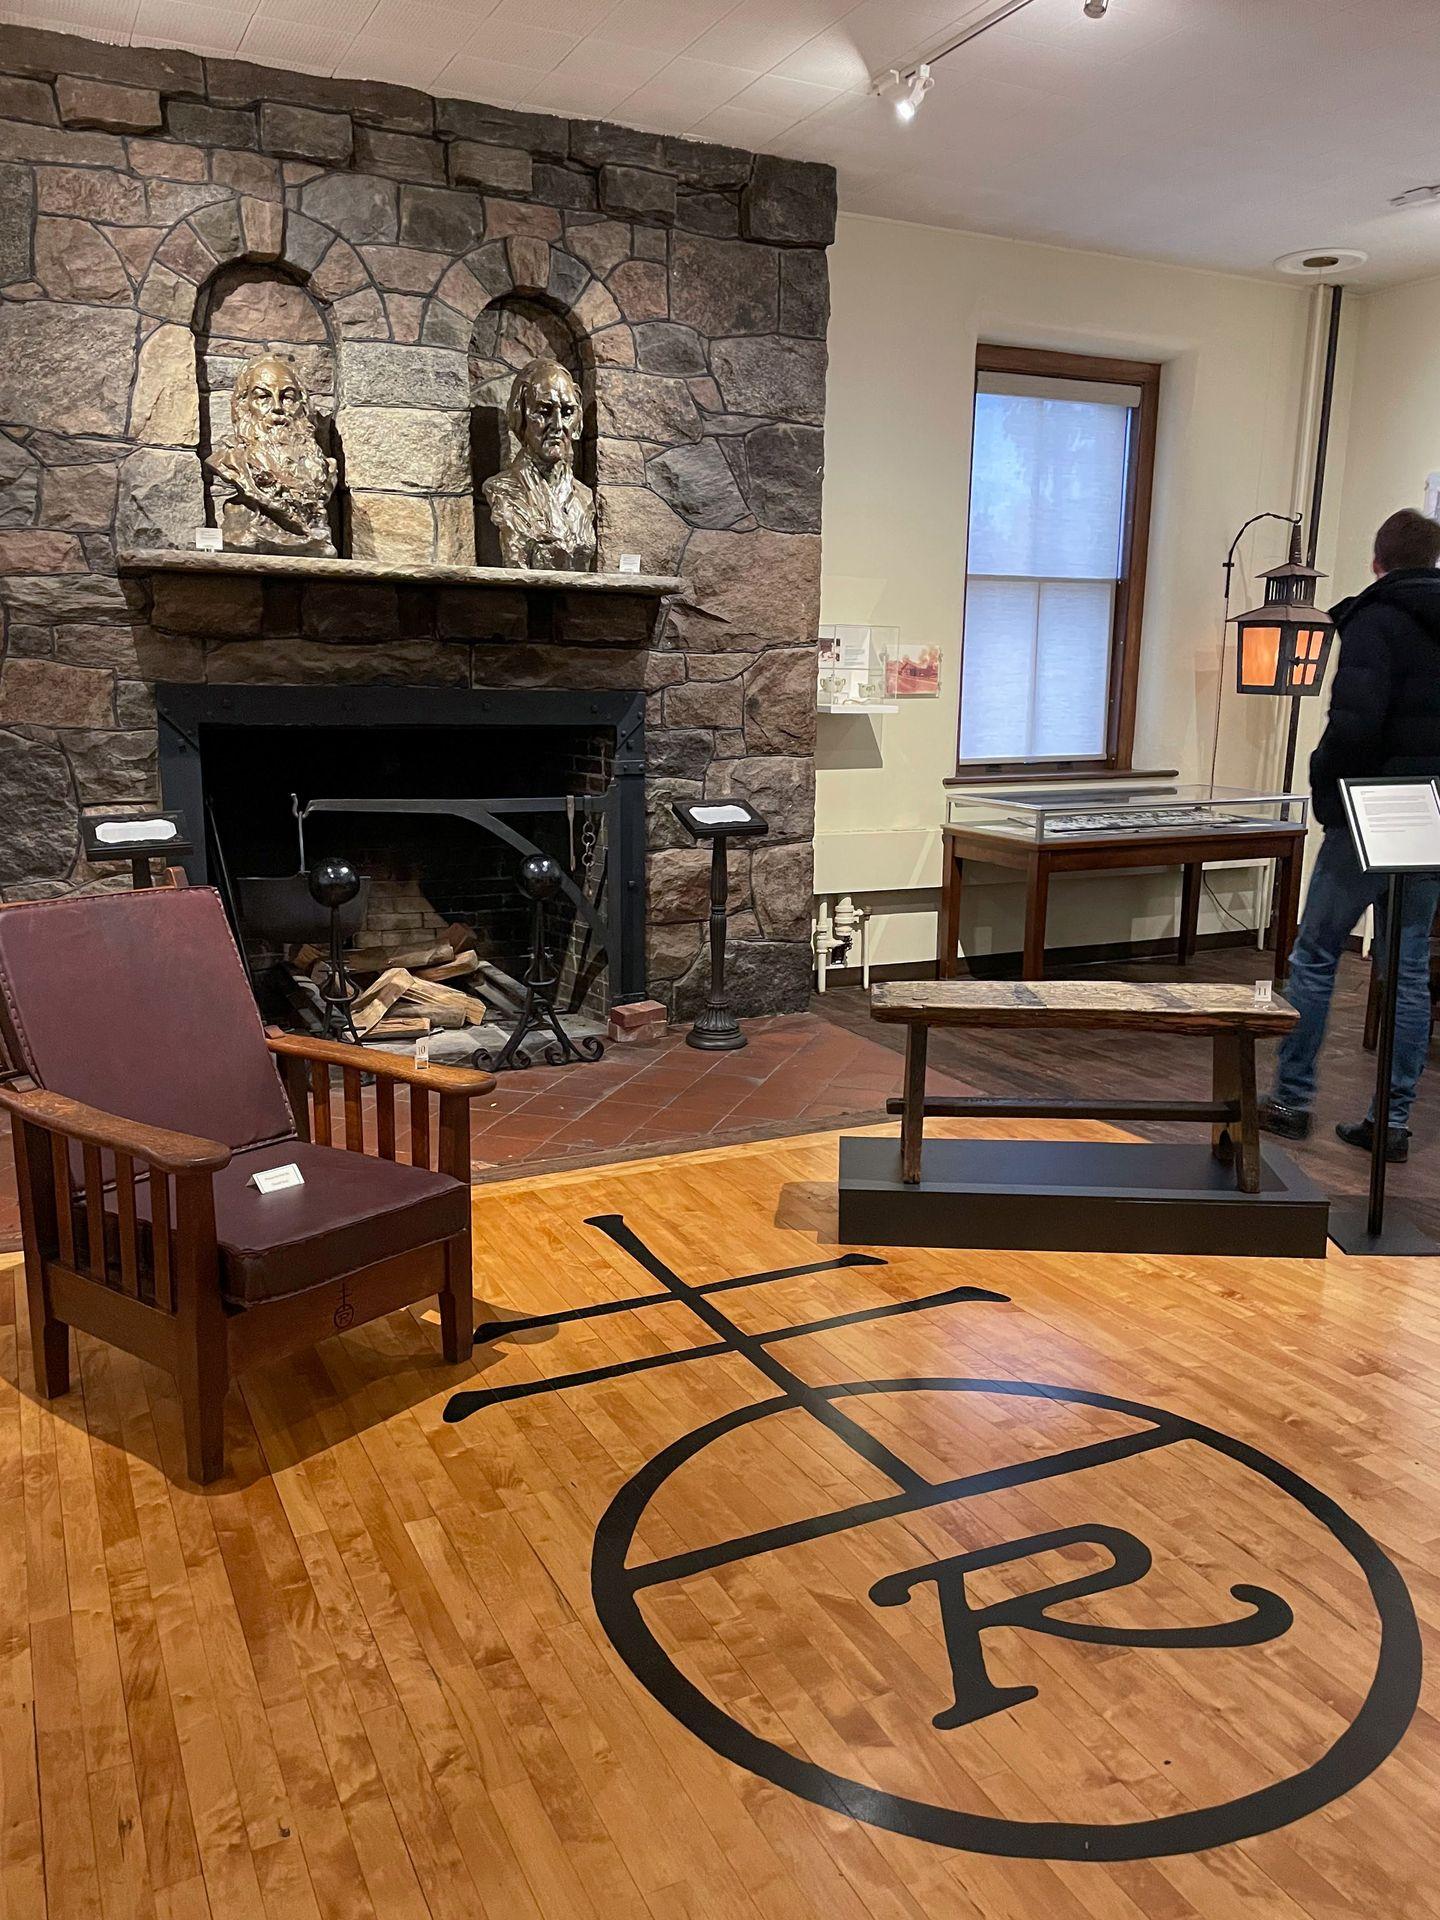 A room with a stone fireplace, a chair and a symbol on the floor for Roycroft furniture.